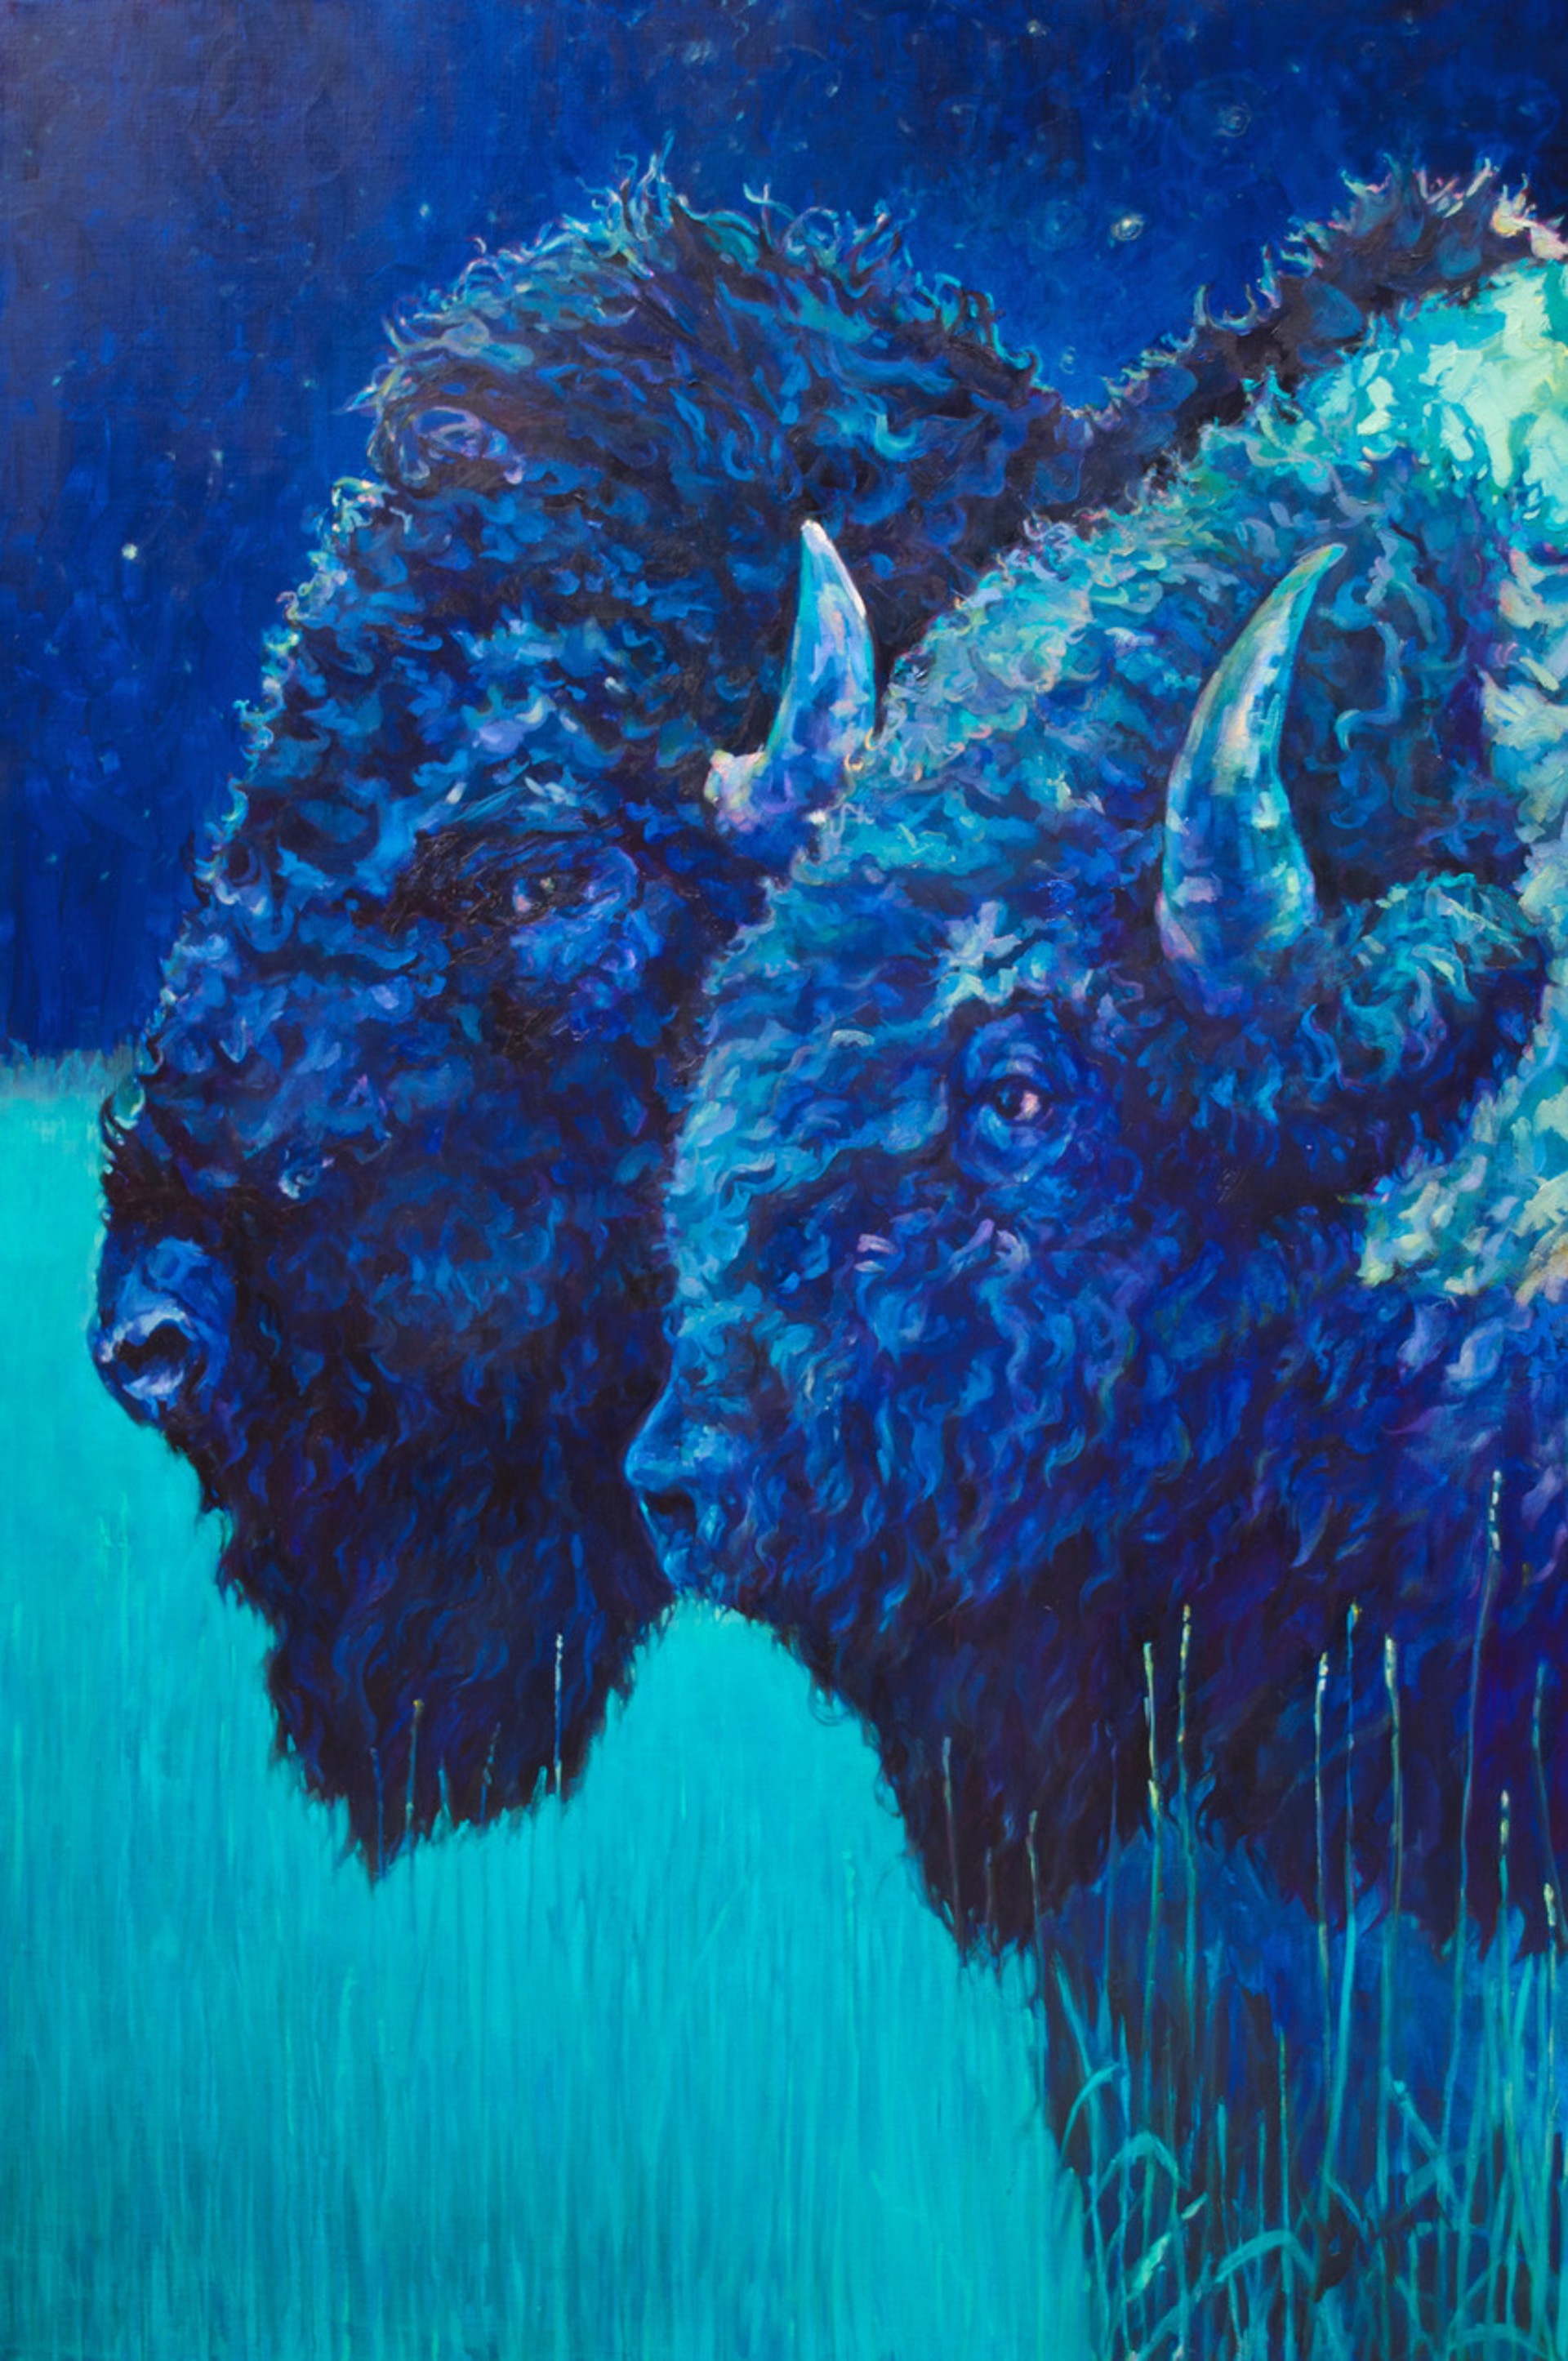 Patricia Griffin Bison Portrait In Oil On Linen, A Contemporary Fine Art Painting and Modern Wildlife Art Piece Available At Gallery Wild